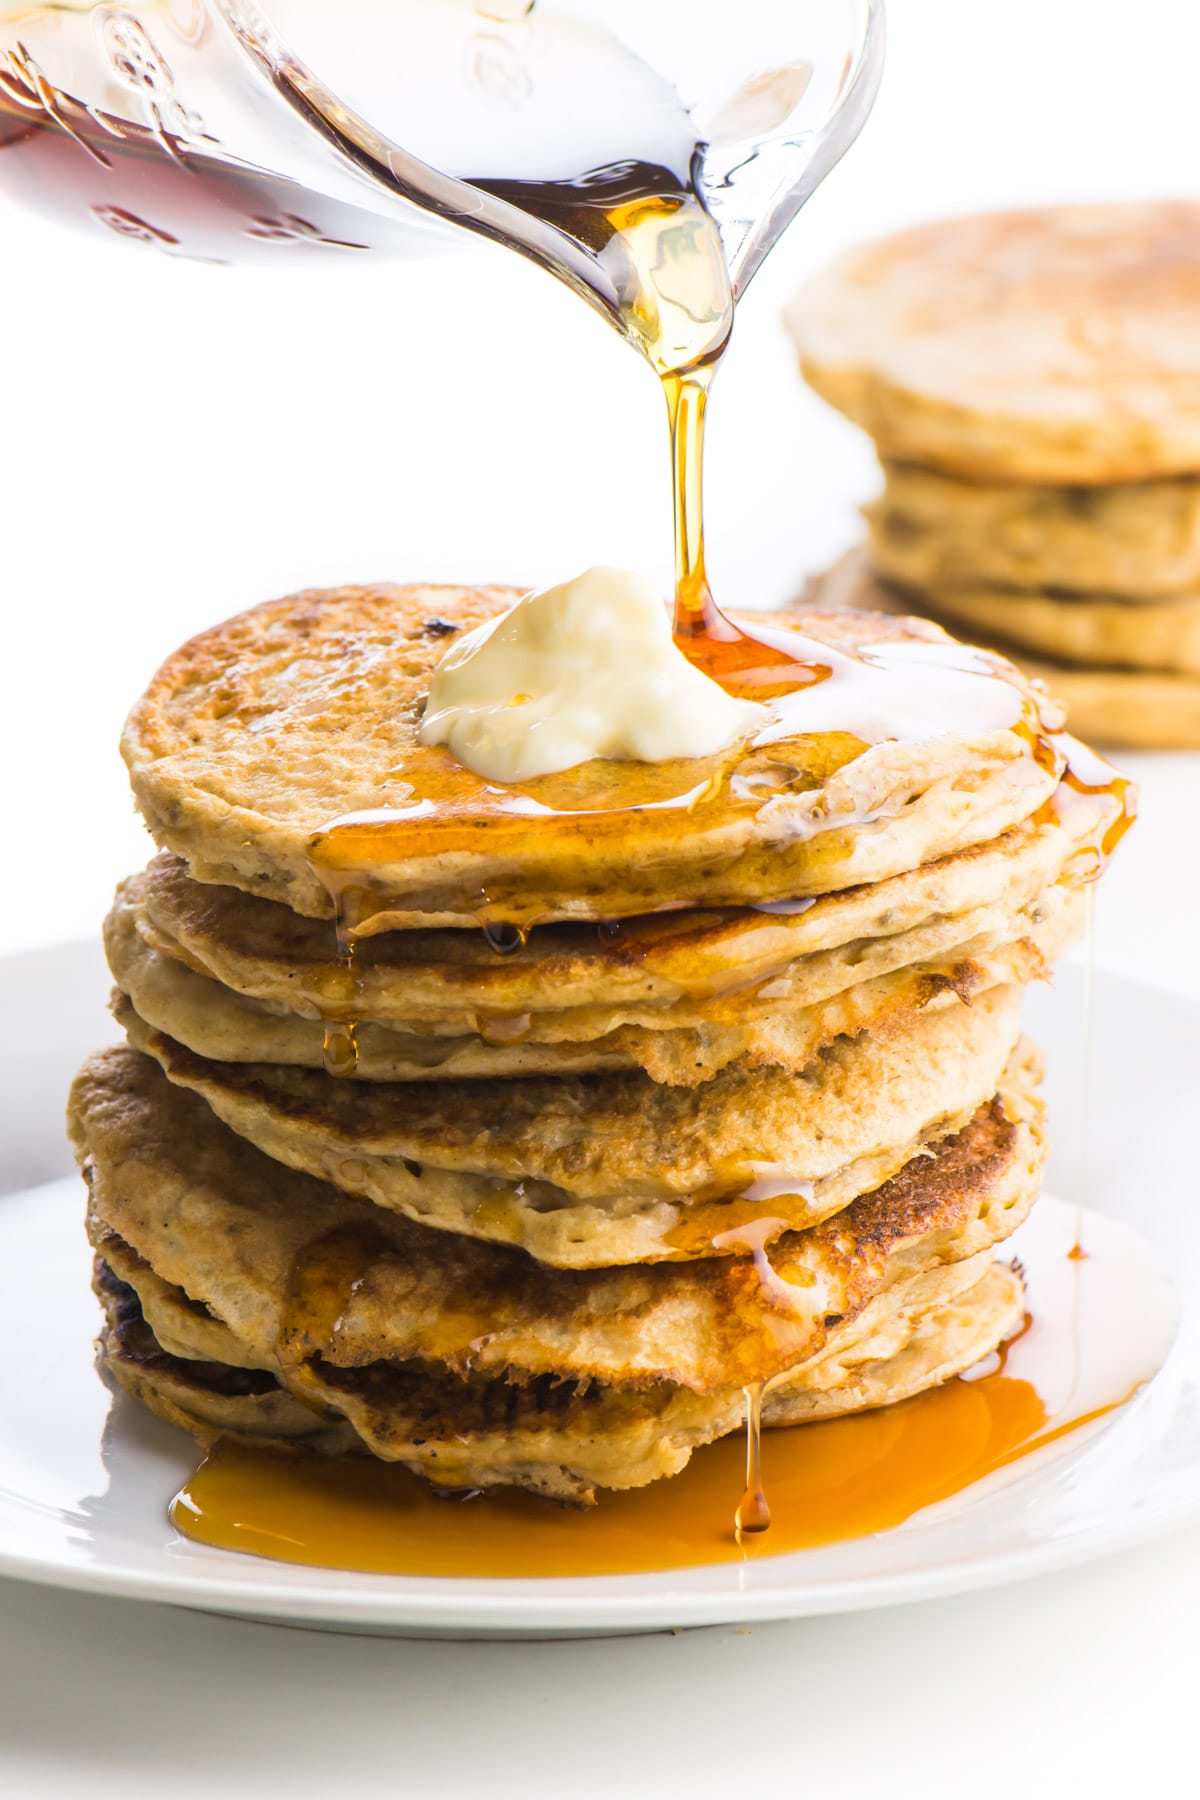 A stack of these pancakes without eggs is sitting on a plate. The top one has a pat of melty vegan butter. A glass pitcher is pouring maple syrup and it is dropping down the sides of the pancakes. There are more pancakes in the background.